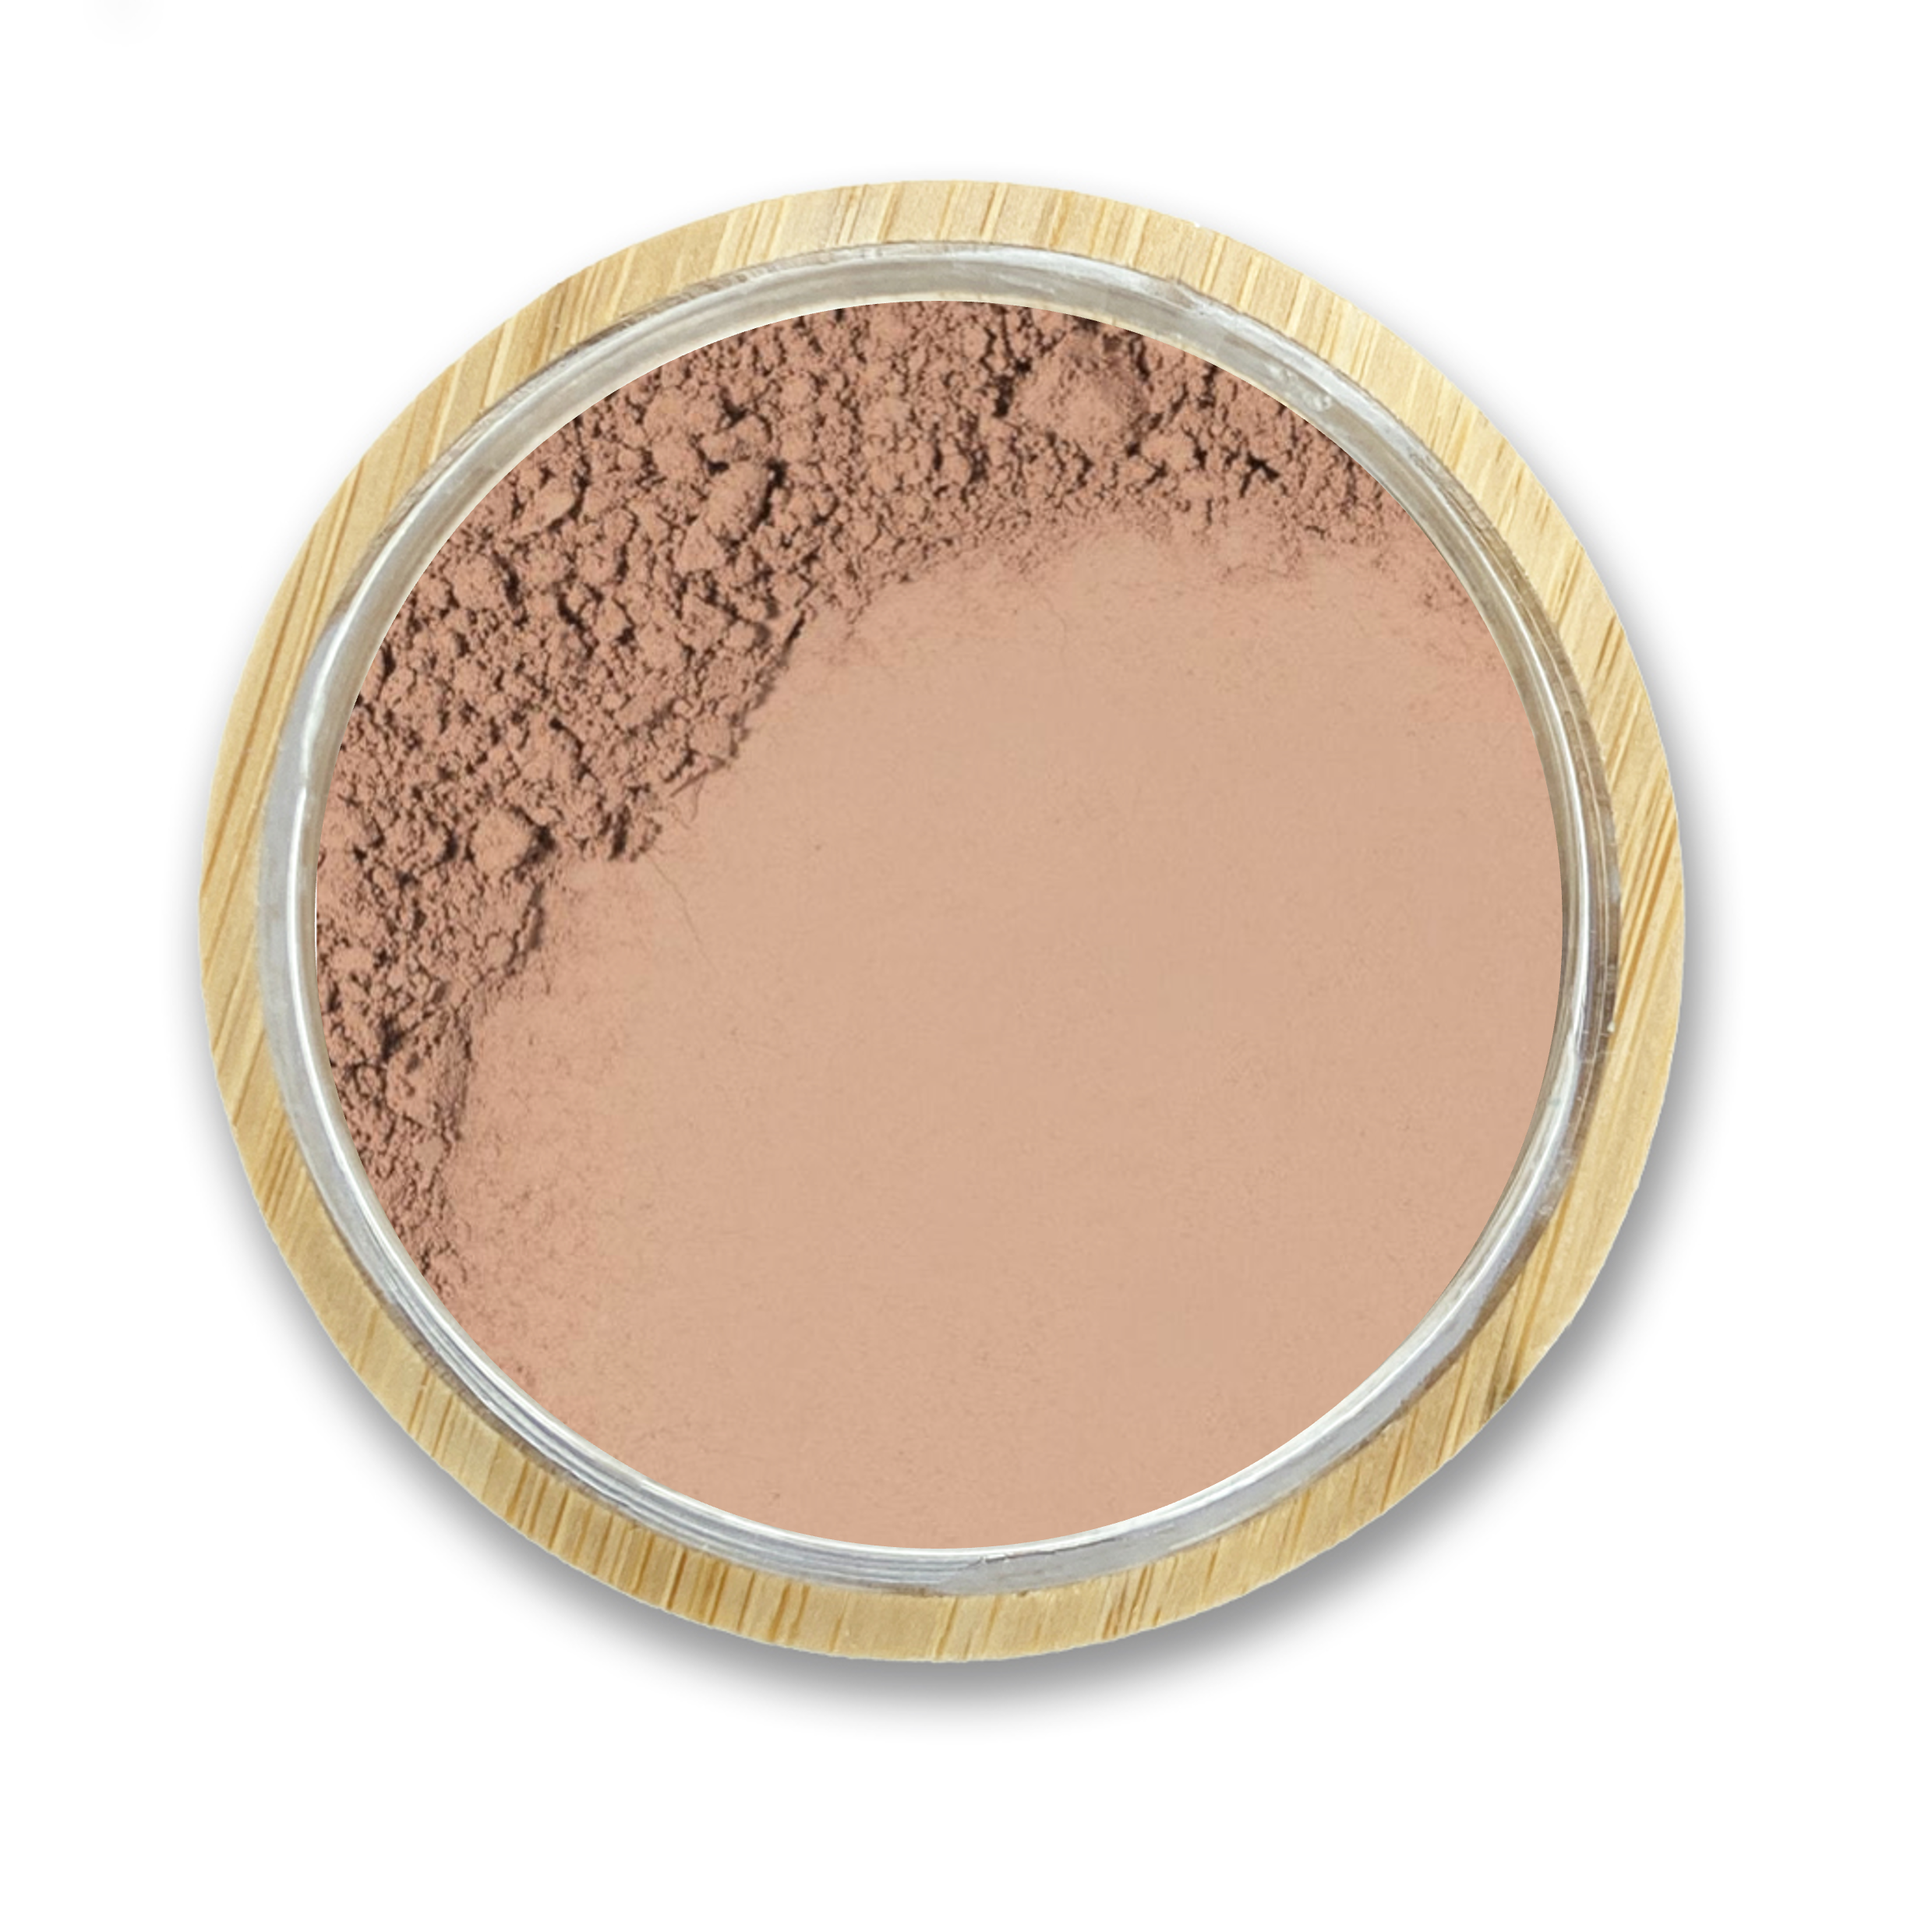 LARGE Loose Powder Mineral Bronzer - Without Mica, Titanium Dioxide, & More!